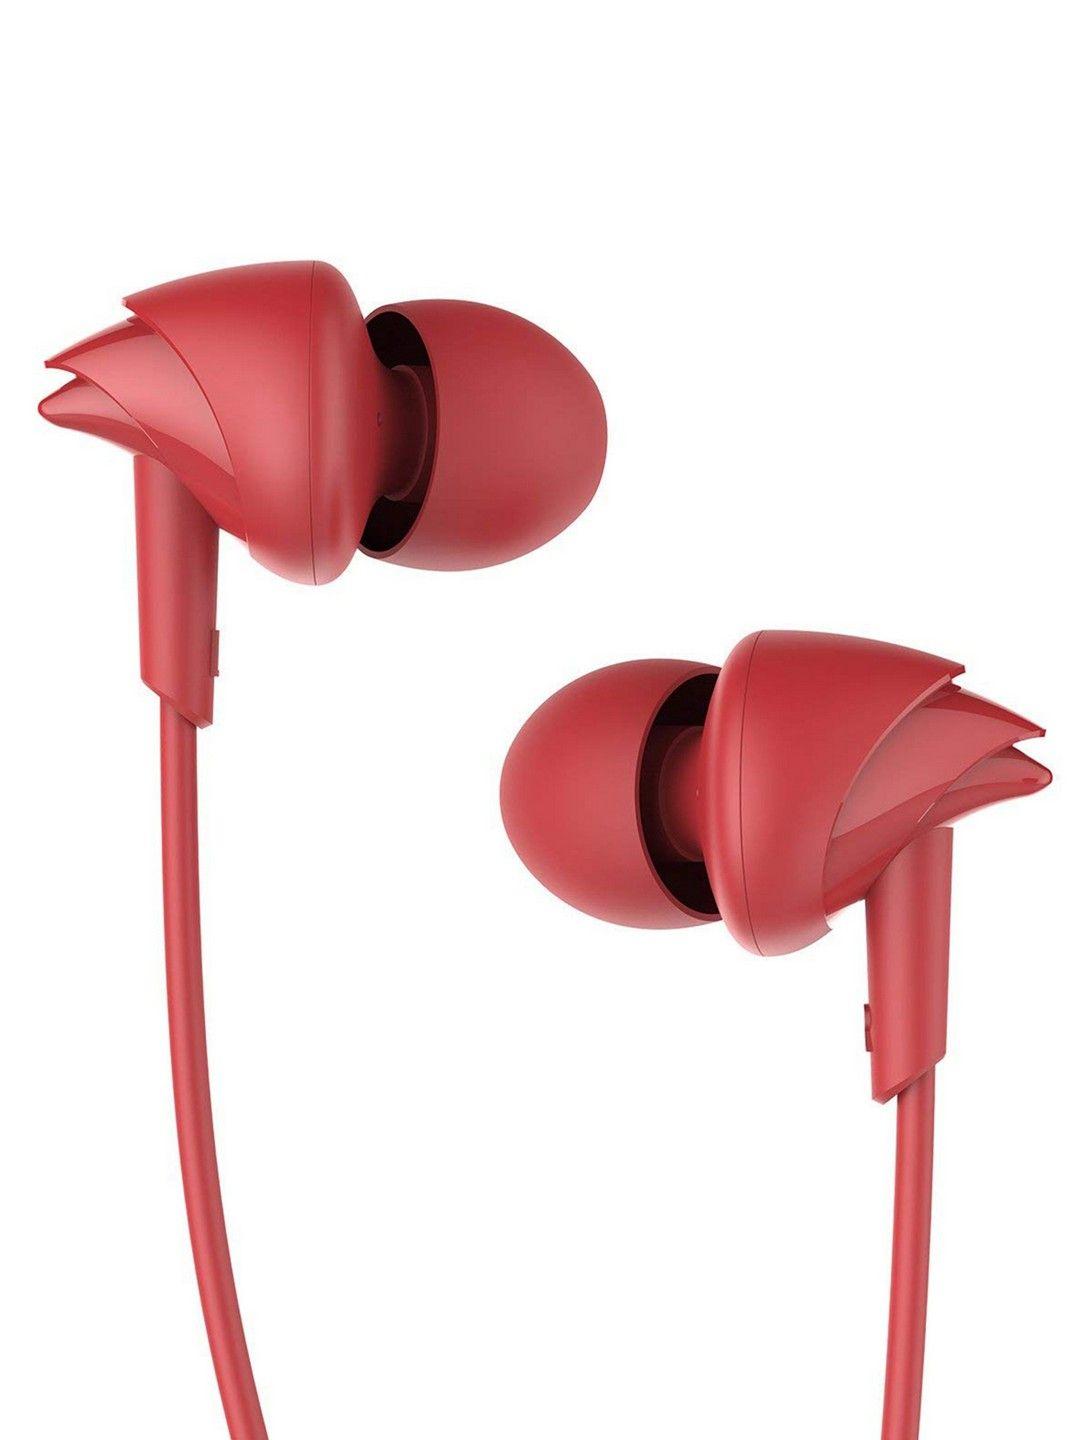 boat bassheads 100 m furious red earphones with enhanced bass hawk-inspired design & mic